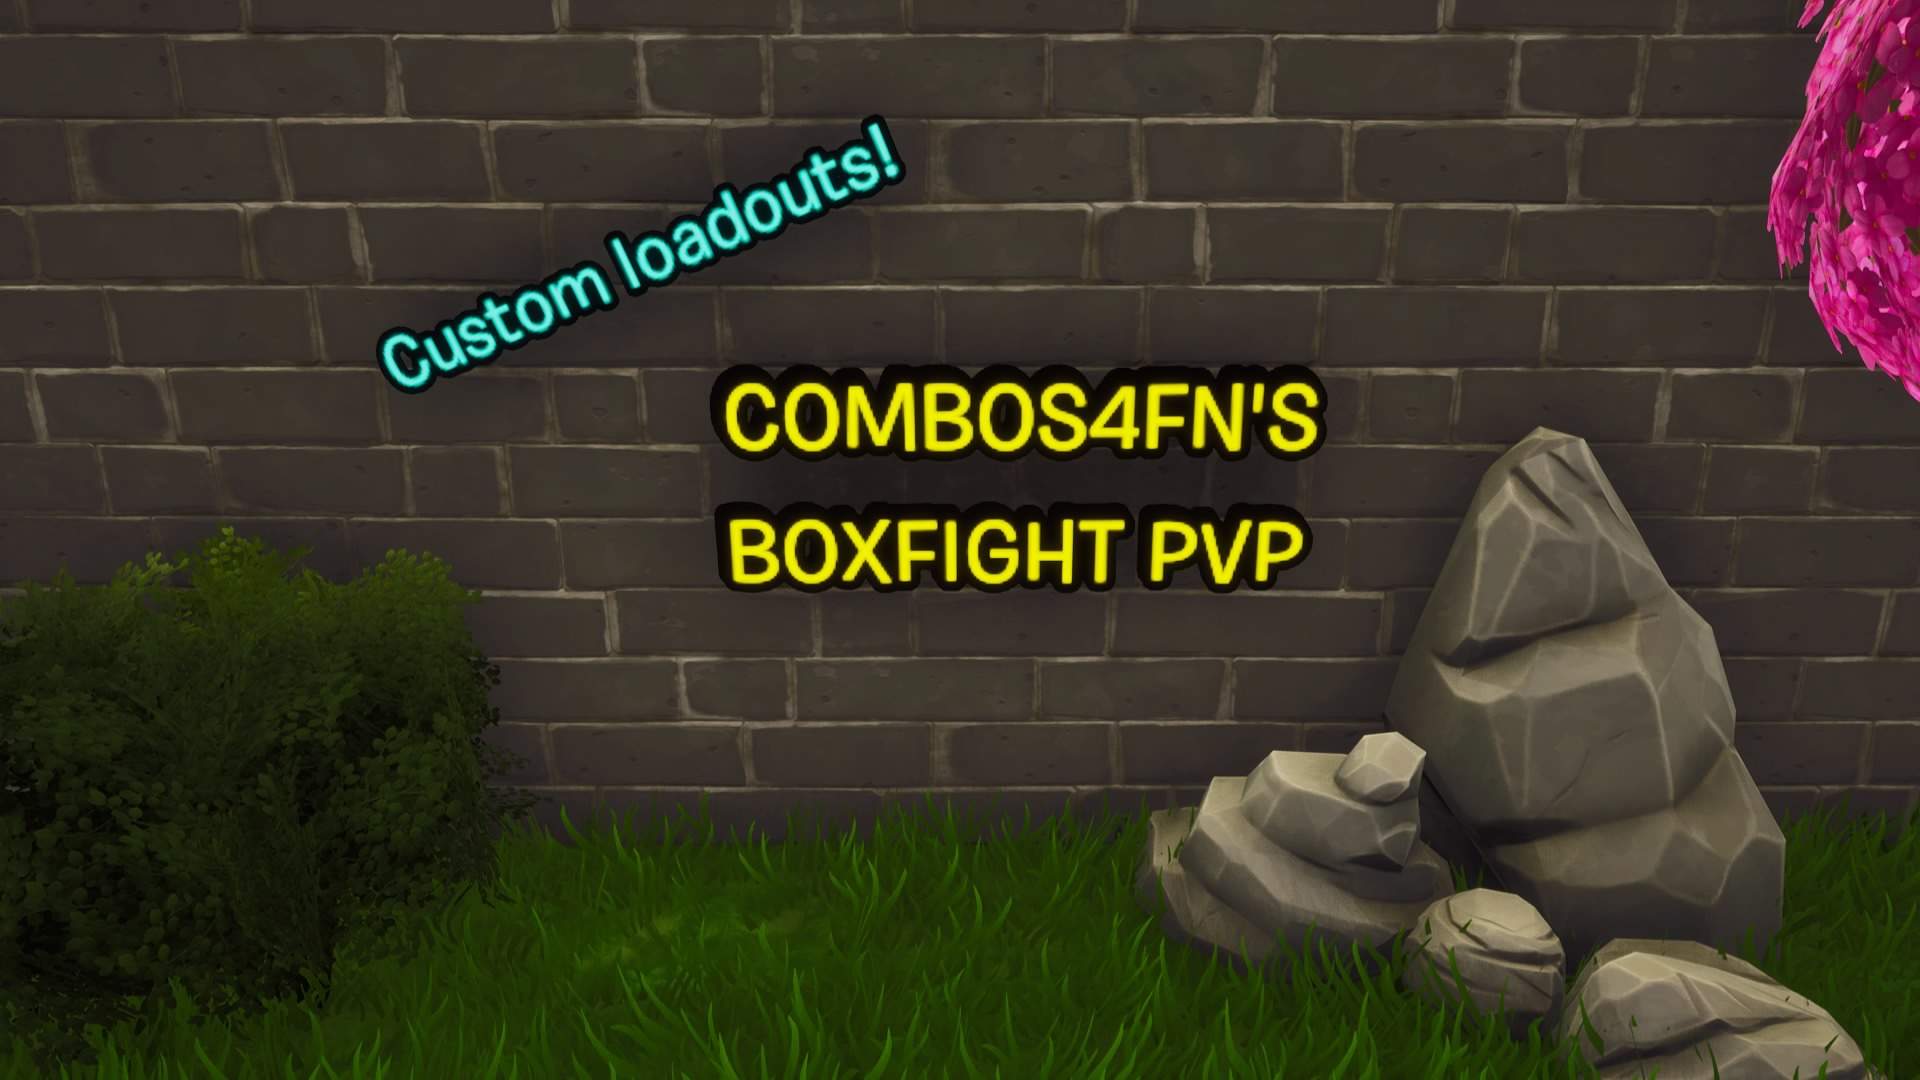 COMBOS4FN'S BOXFIGHT PVP